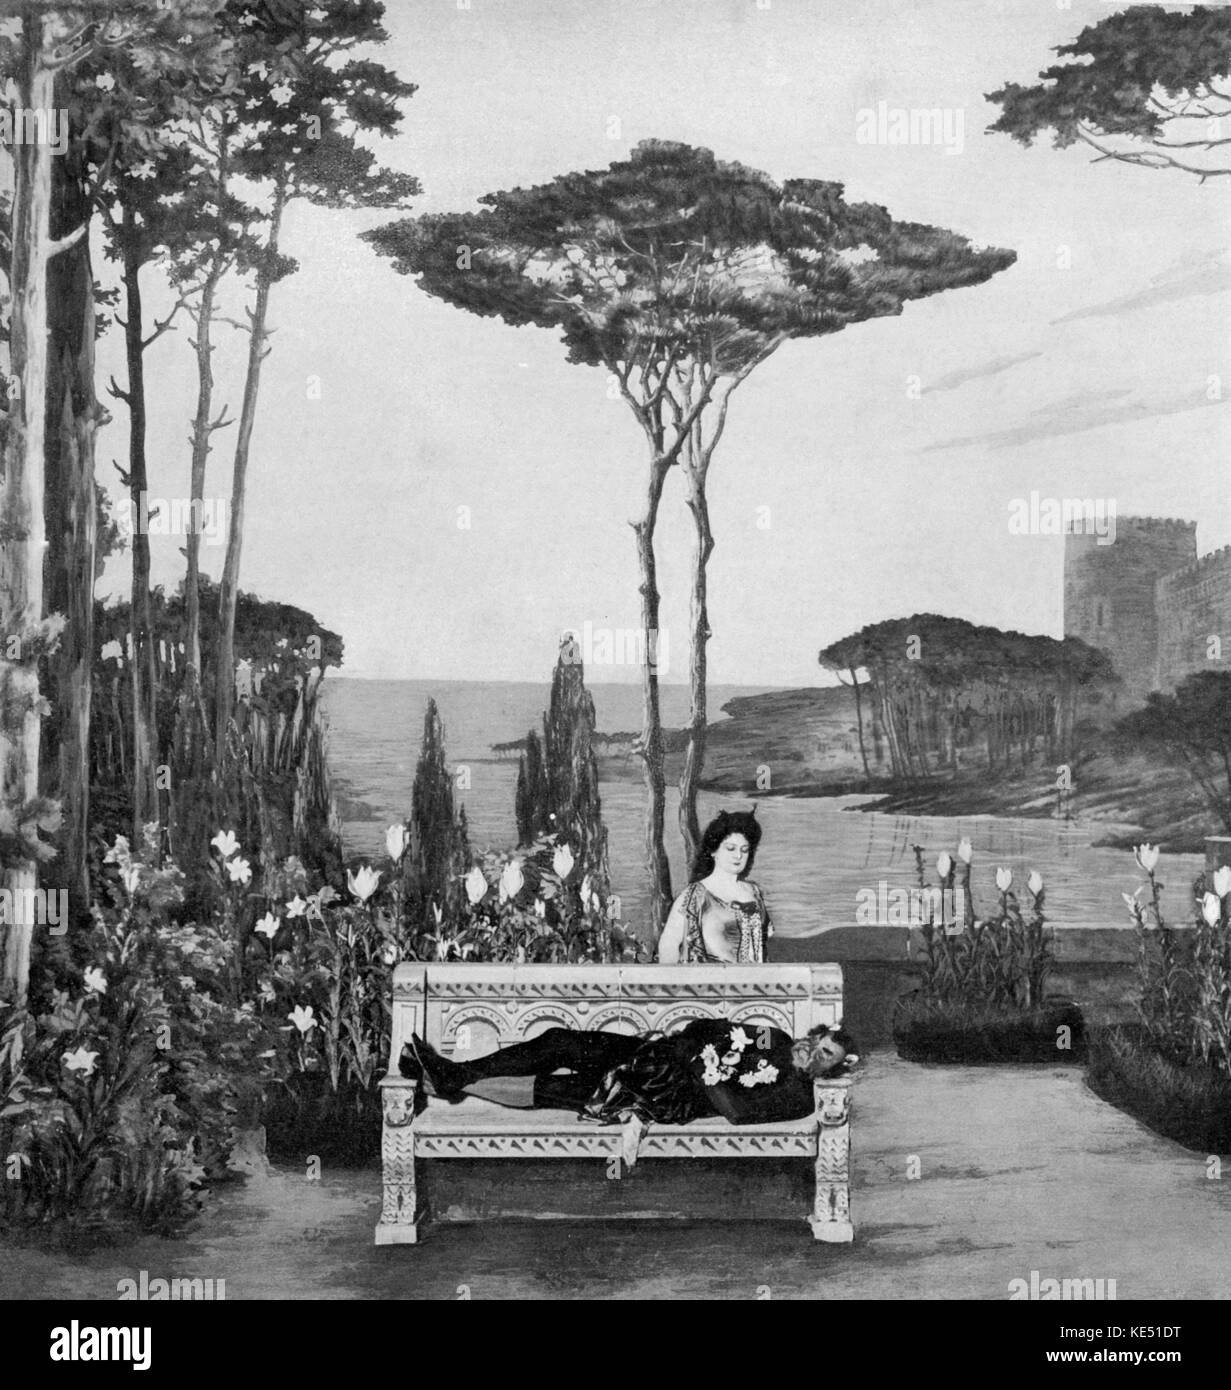 Act II of Jules Massenet 's opera Grisélidis with Lucien Fugére as the Devil, and Jeanne-Louise Tiphaine as Fiamina Premiered at the Opéra -Comique, Paris, France, 20 November 1901   JM: French composer, 12 May 1842 - 13 August 1912 LF: French baritone, 22 July 1848 - 15 January 1935 JLT: French soprano, 20 Aug 1873 - Sep 1958 Stock Photo